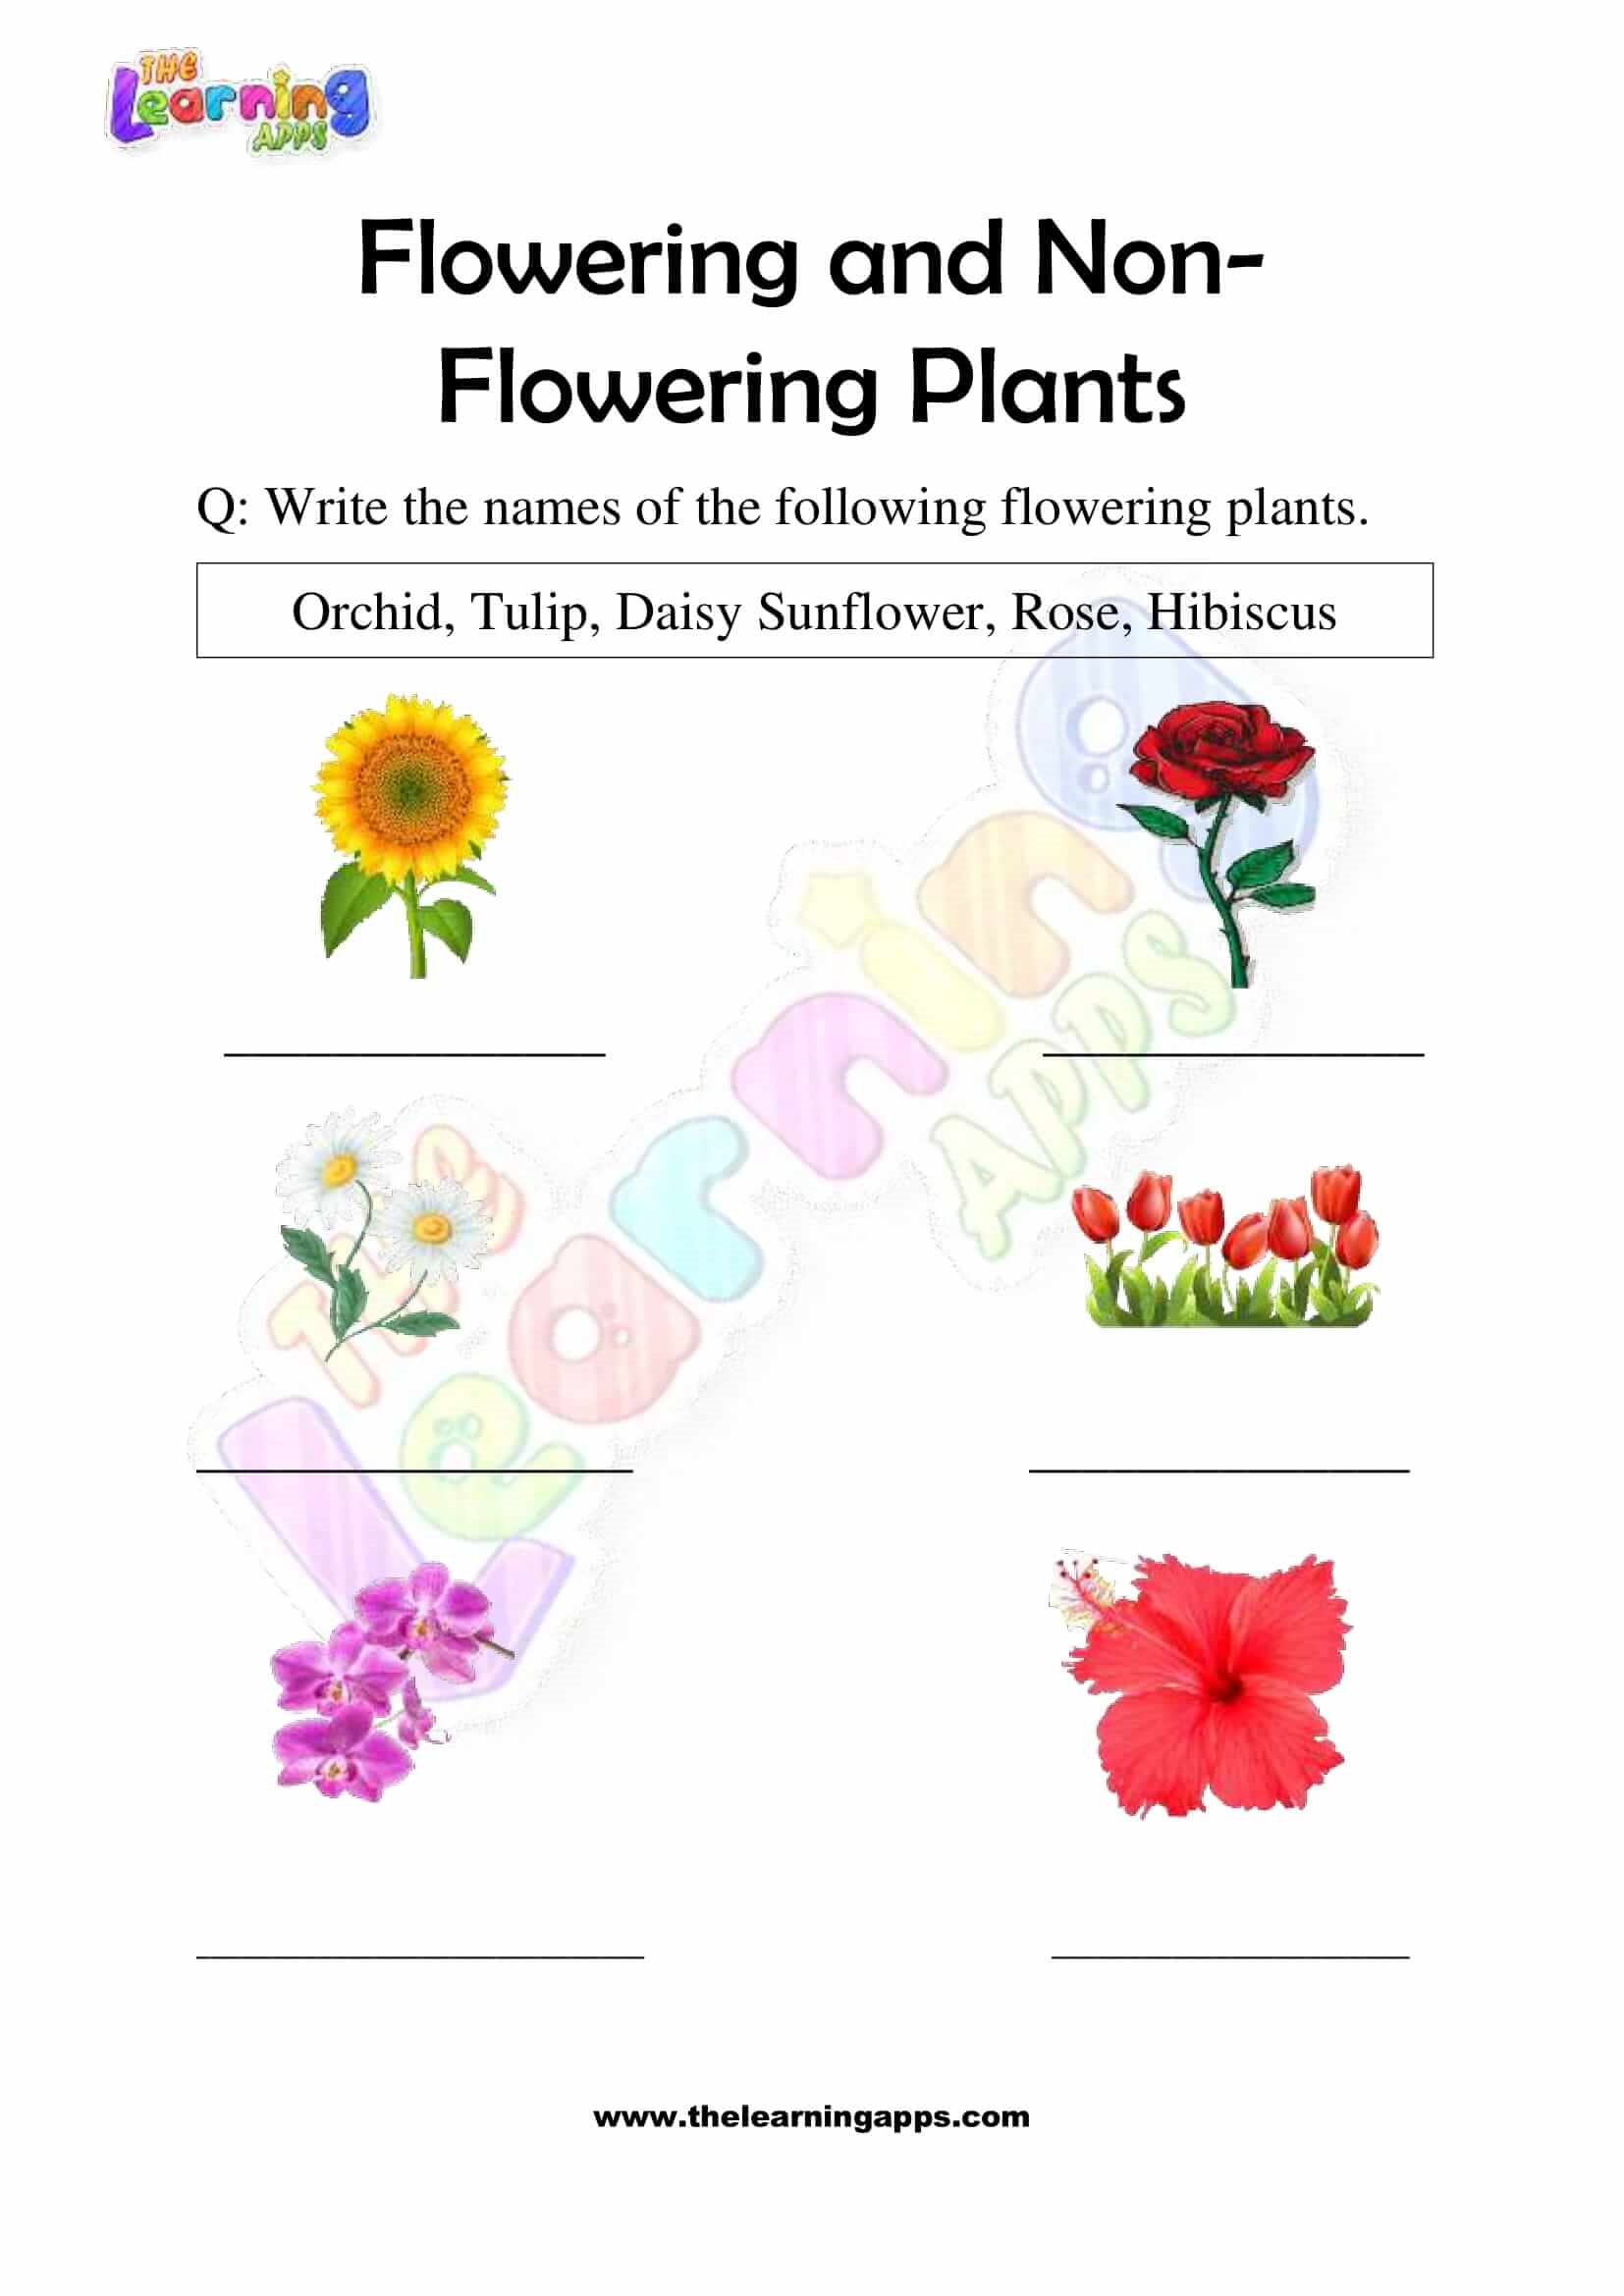 Flowering-and-Non-Flowering-Plants-Worksheets-Grade-3-Activity-5